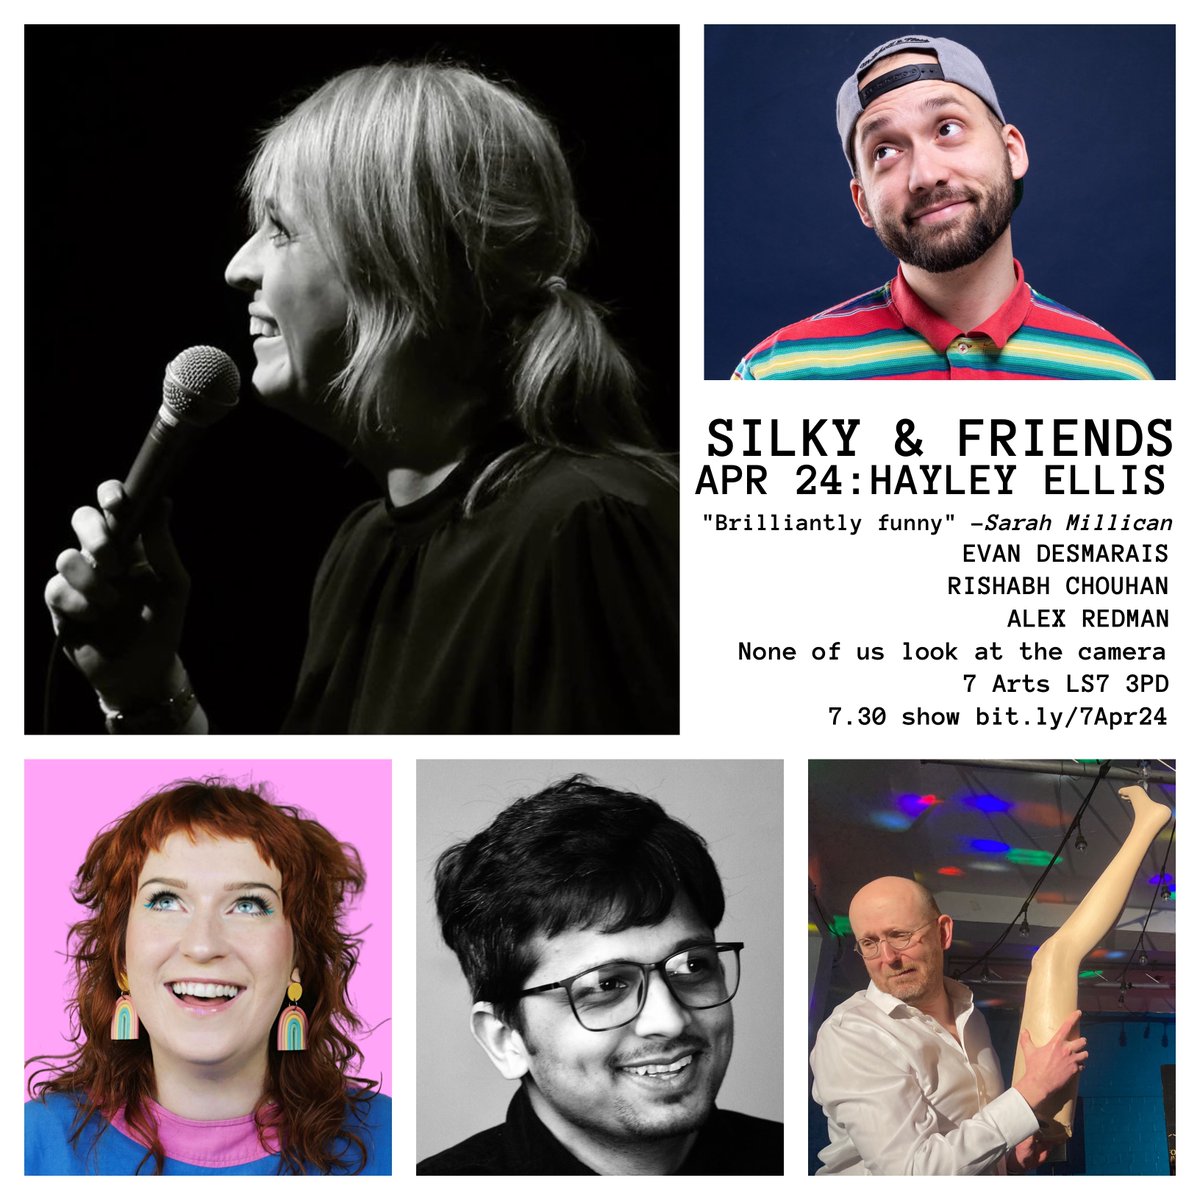 TONIGHT! Please book NOW, THEN share this for us? Upcoming headliners include @eleanortiernan, Mark Thomas, @robinince1969. Regulars get first bite at tickets. Head to bit.ly/7Apr24 Sharing REALLY helps: the best adverts have two legs.